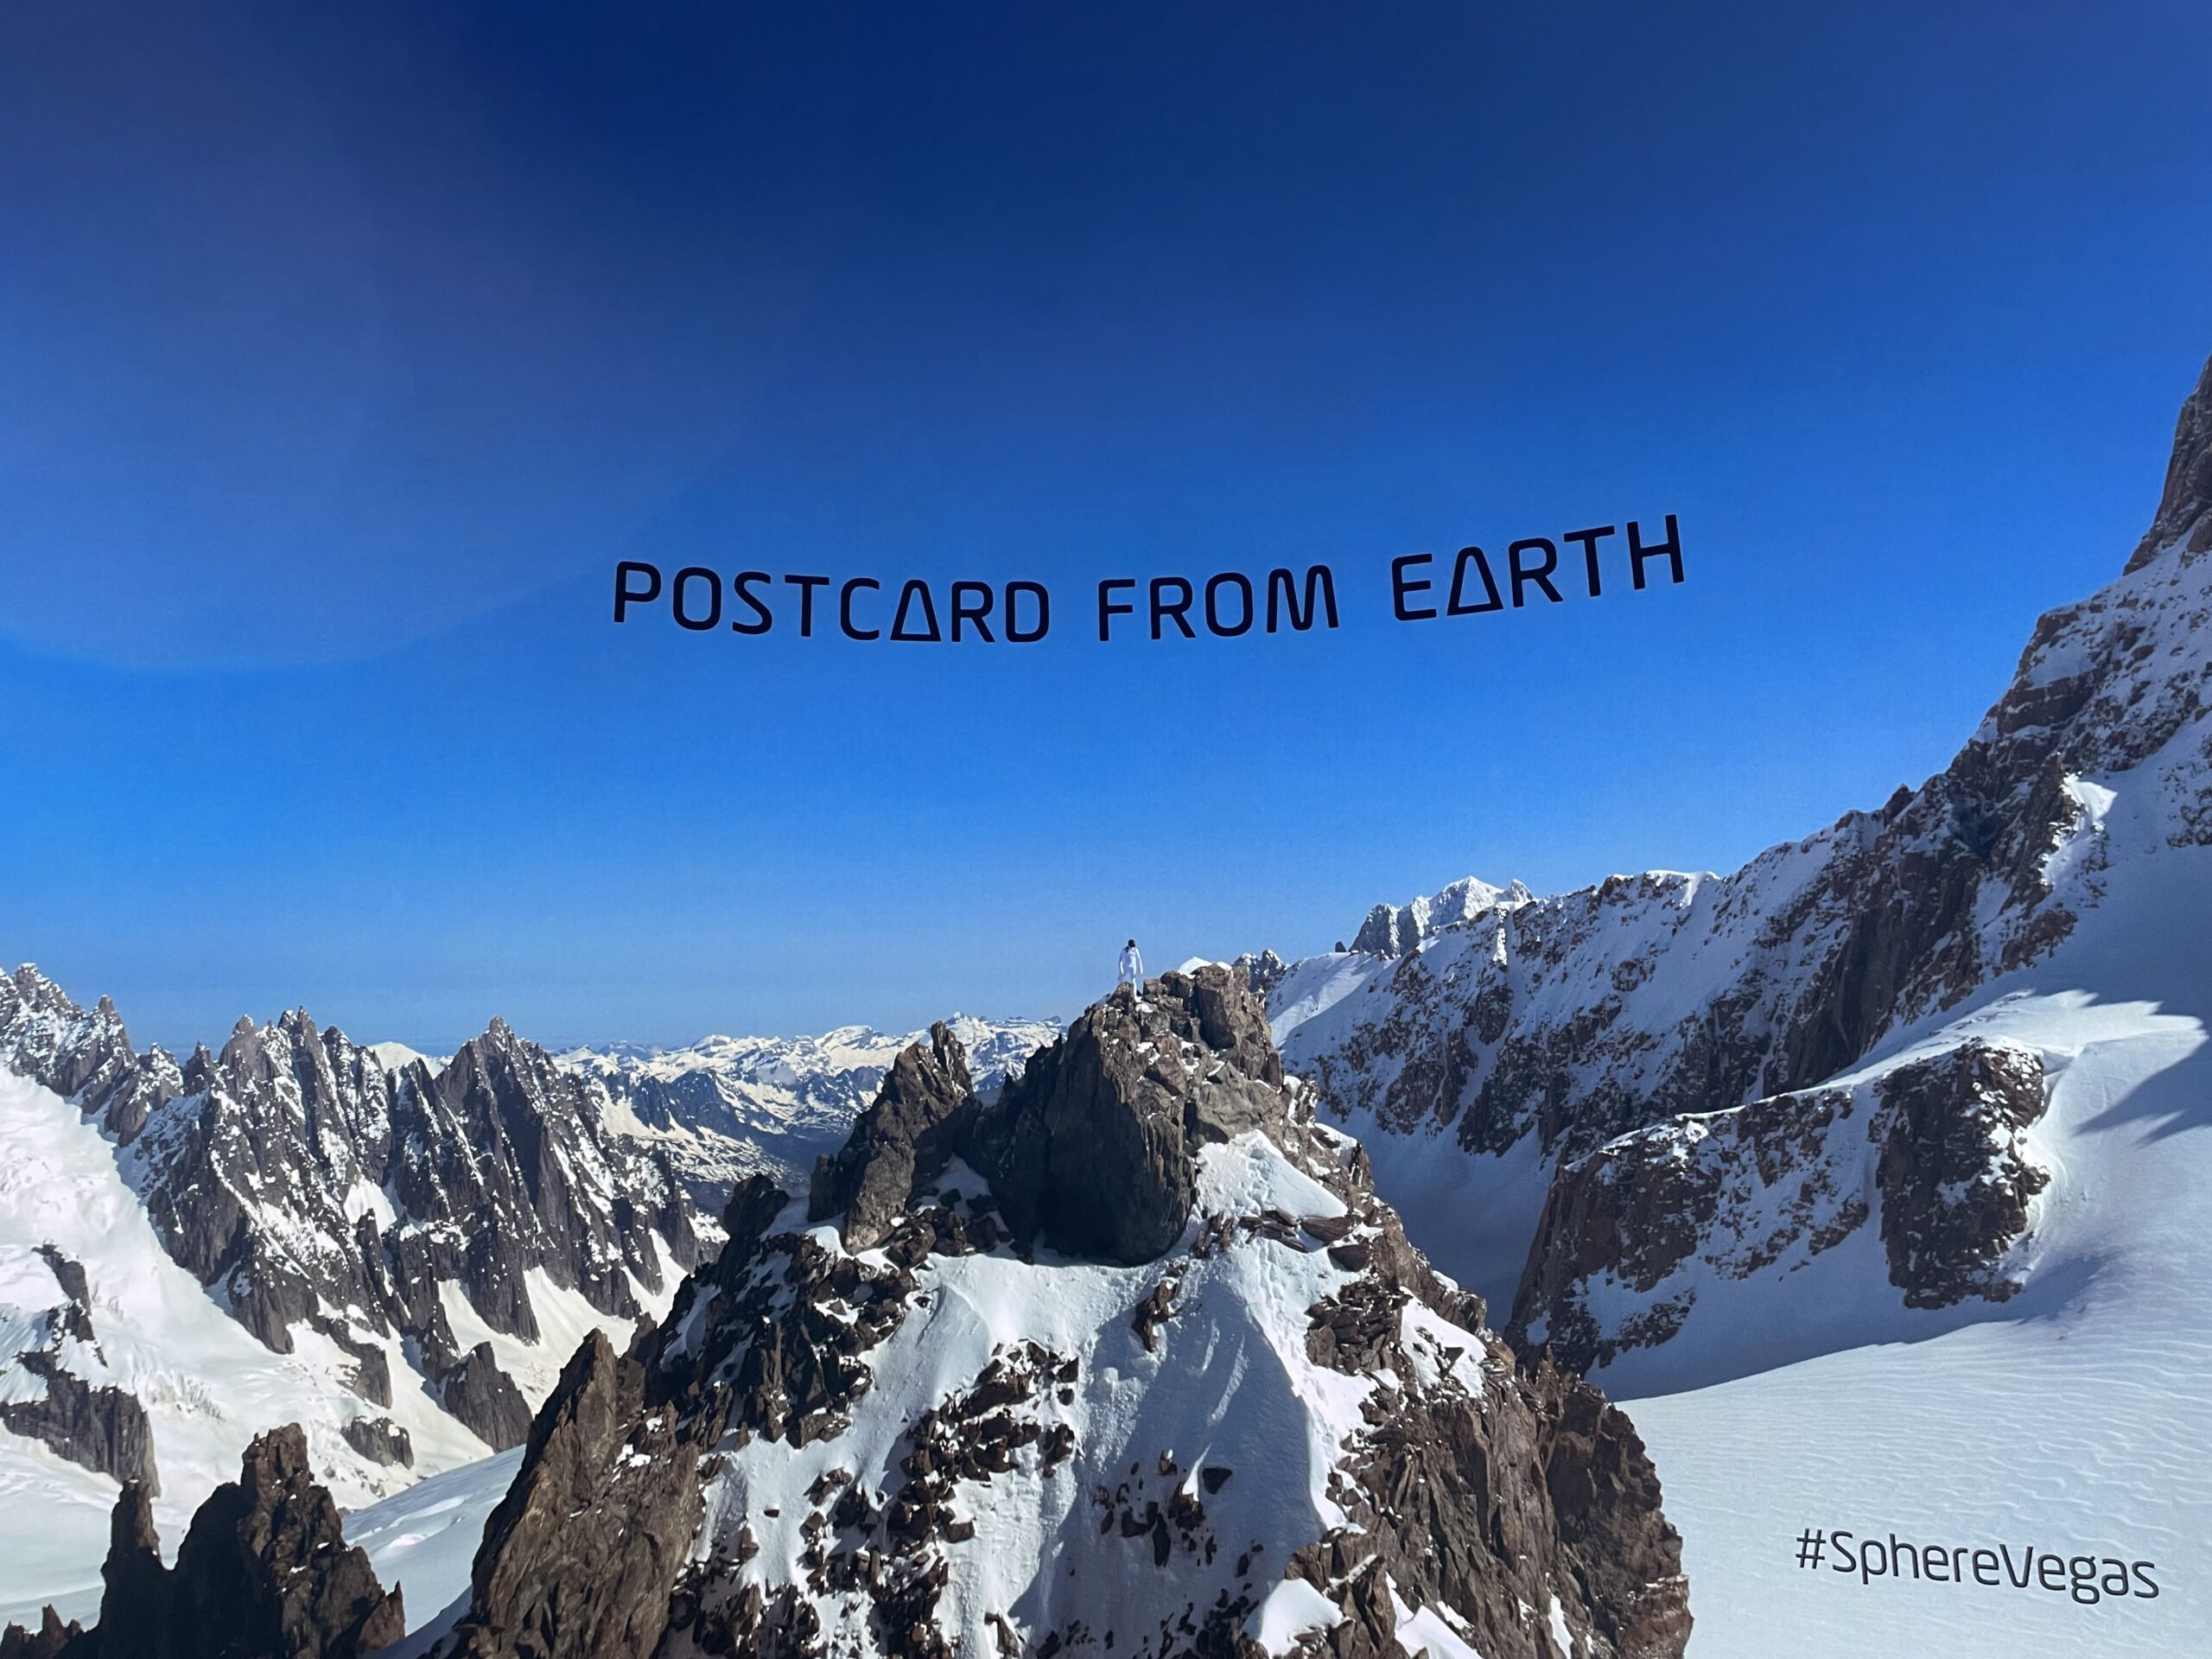 screen that reads "postcard from earth" among snowy mountains